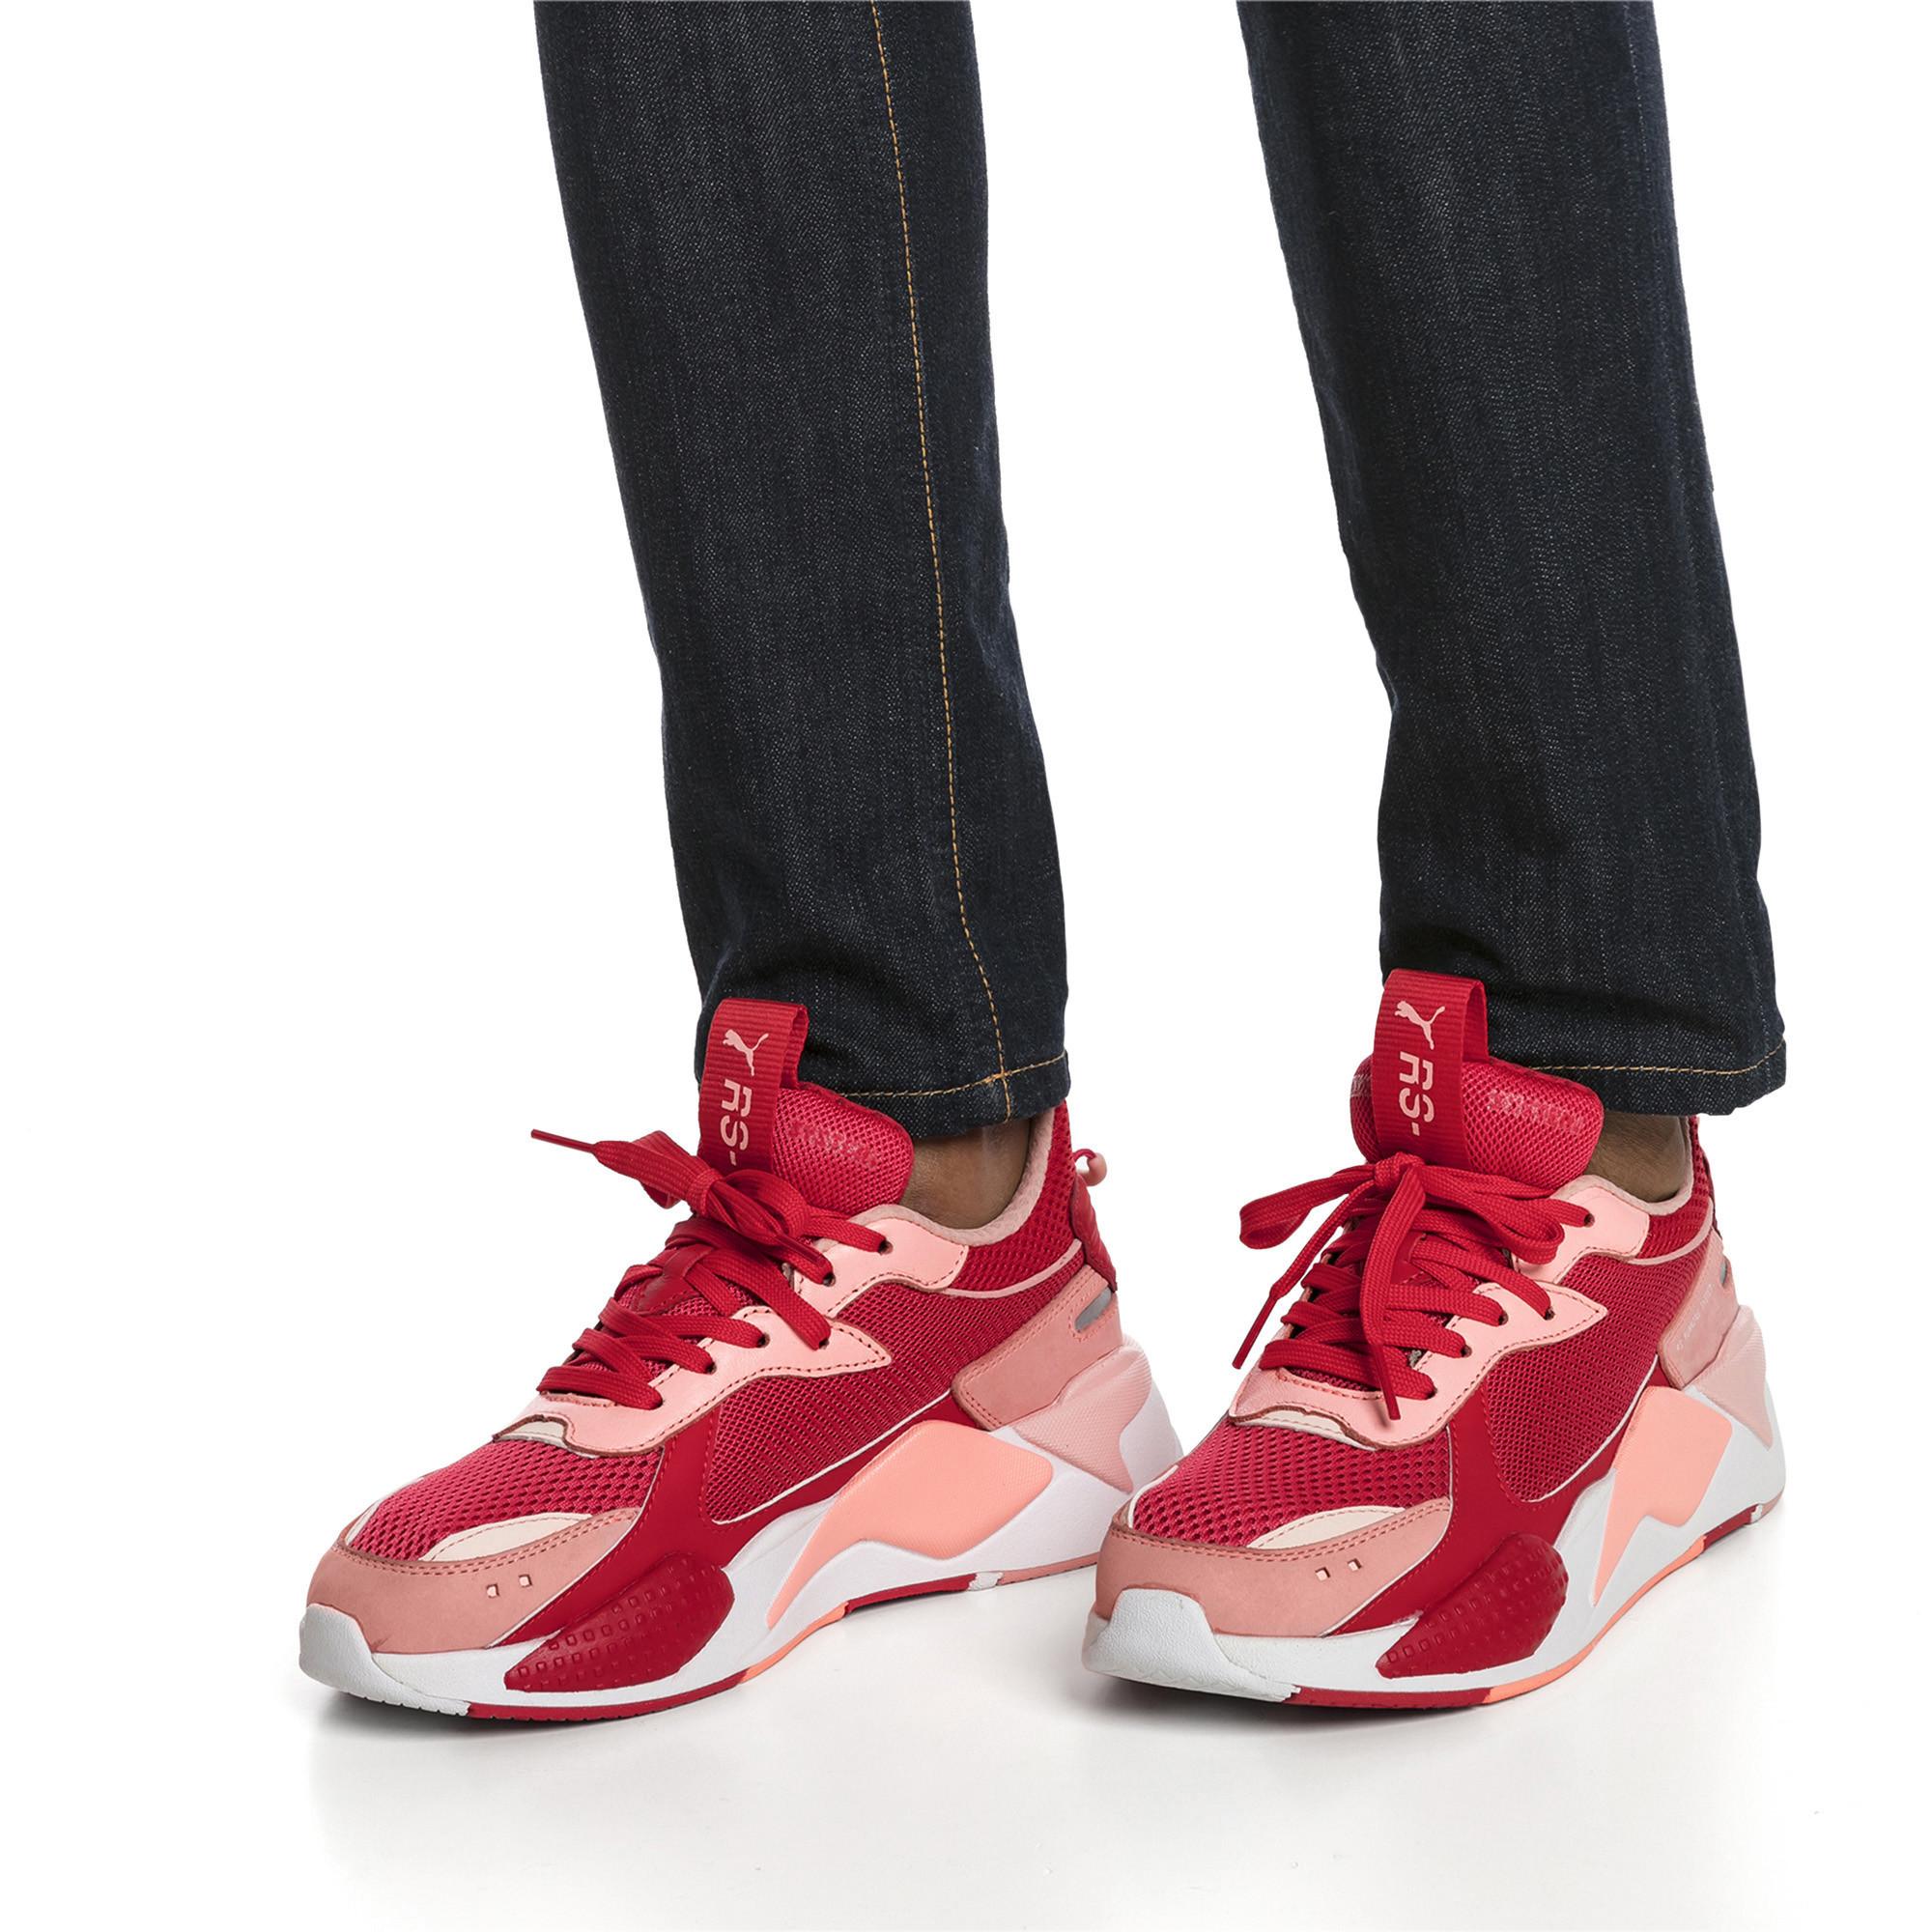 PUMA Rubber Rs-x Toys in Red | Lyst